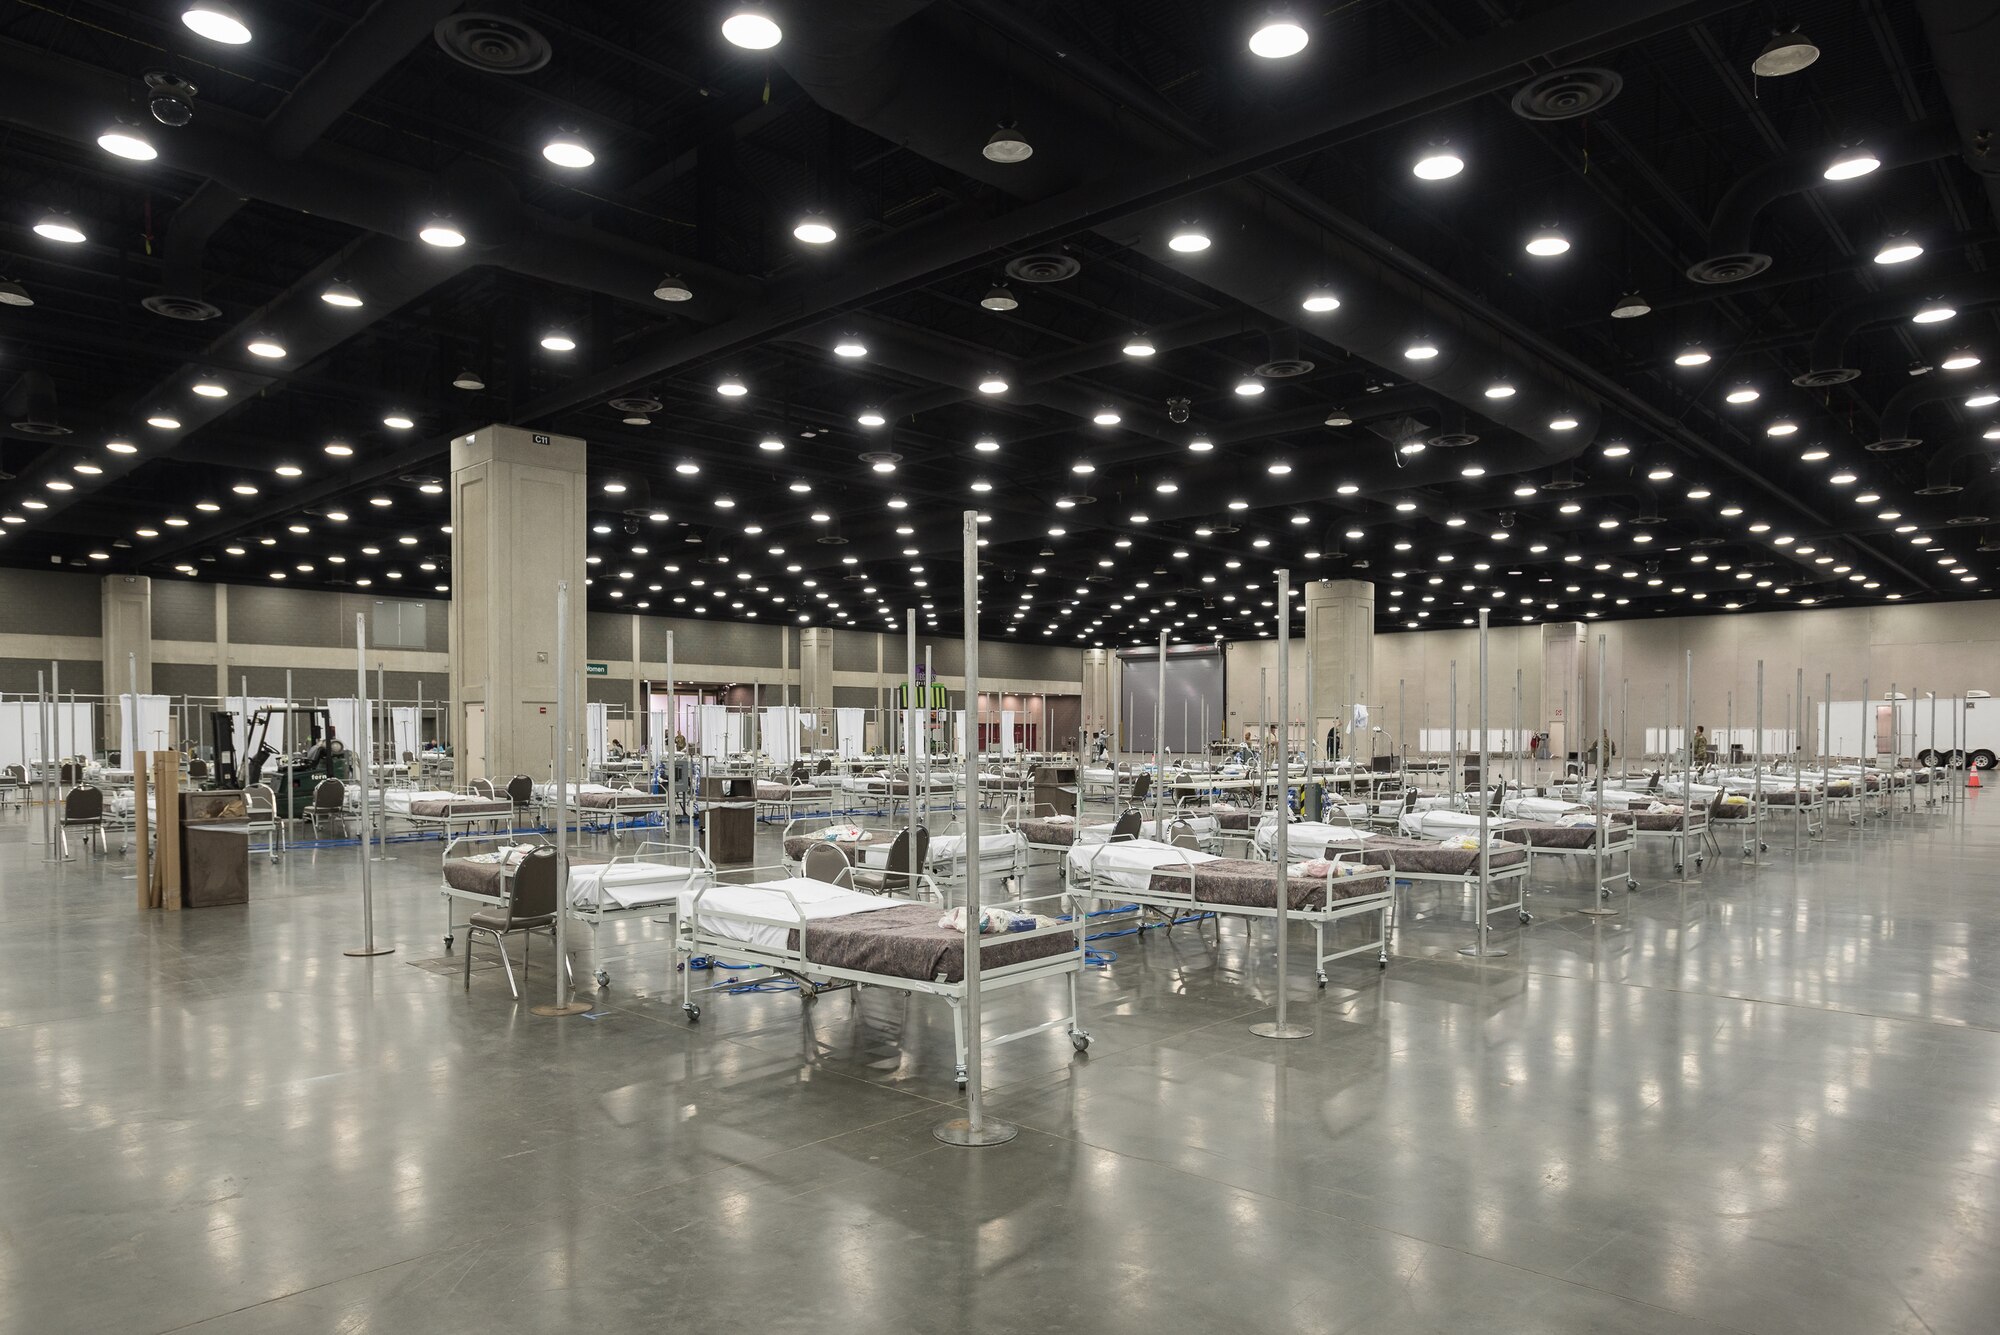 More than 30 members of the Kentucky Air National Guard’s 123rd Civil Engineer Squadron set up hospital beds and clinical space at the Kentucky Fair and Exposition Center in Louisville, Ky., April 14, 2020. The site, which is expected to be operational April 15, will serve as an Alternate Care Facility for patients suffering from COVID-19 if area hospitals exceed available capacity. The location initially can treat up to 288 patients and is scalable to 2,000 beds. (U.S. Air National Guard photo by Dale Greer)